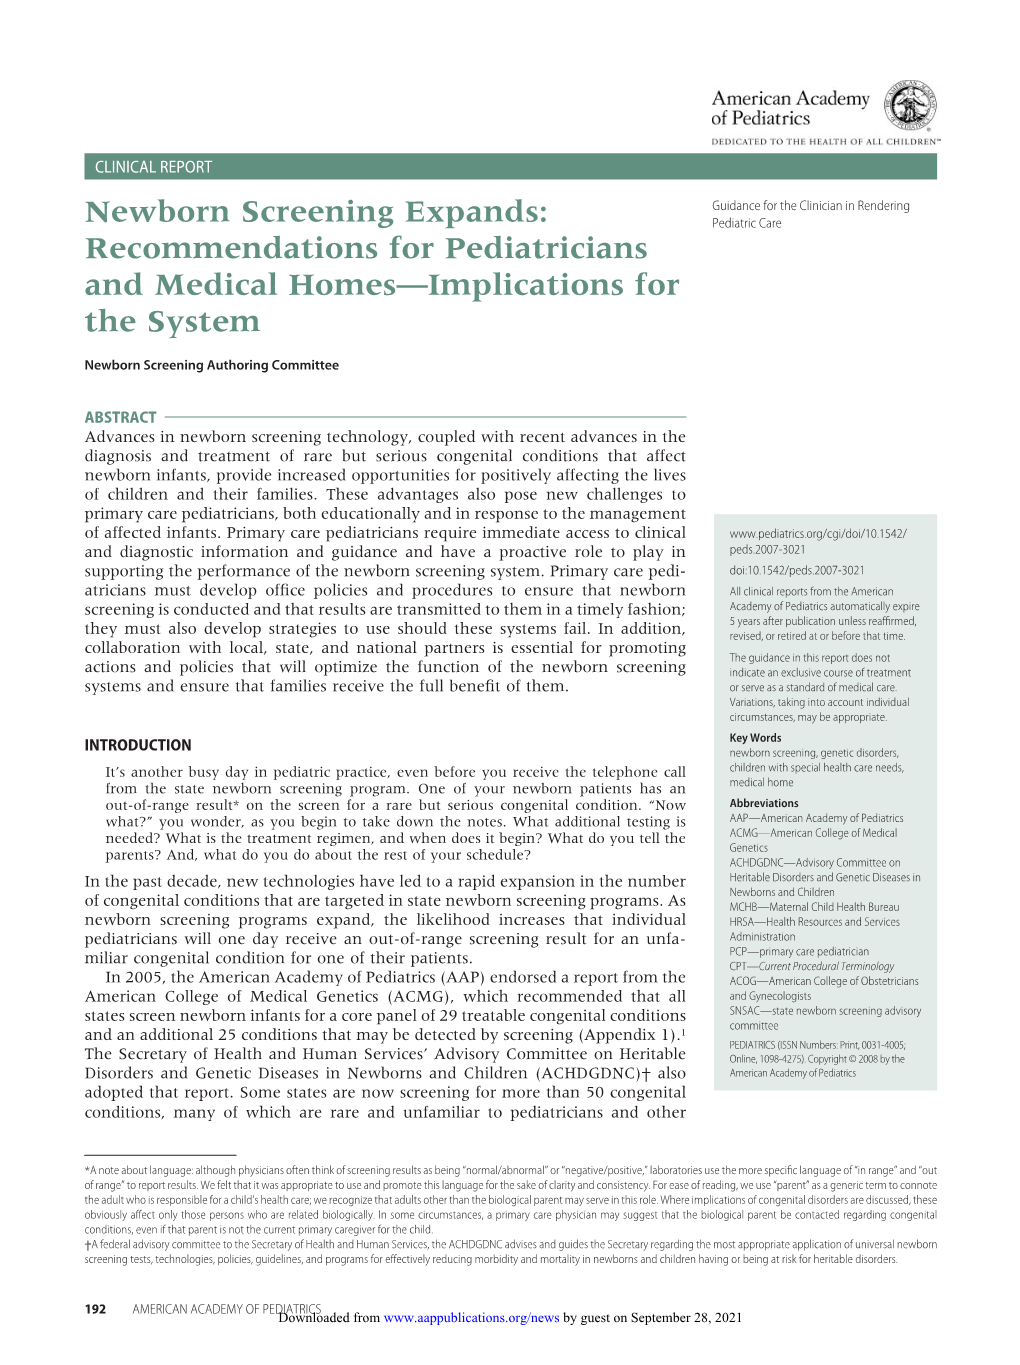 Newborn Screening Expands: Pediatric Care Recommendations for Pediatricians and Medical Homes—Implications for the System